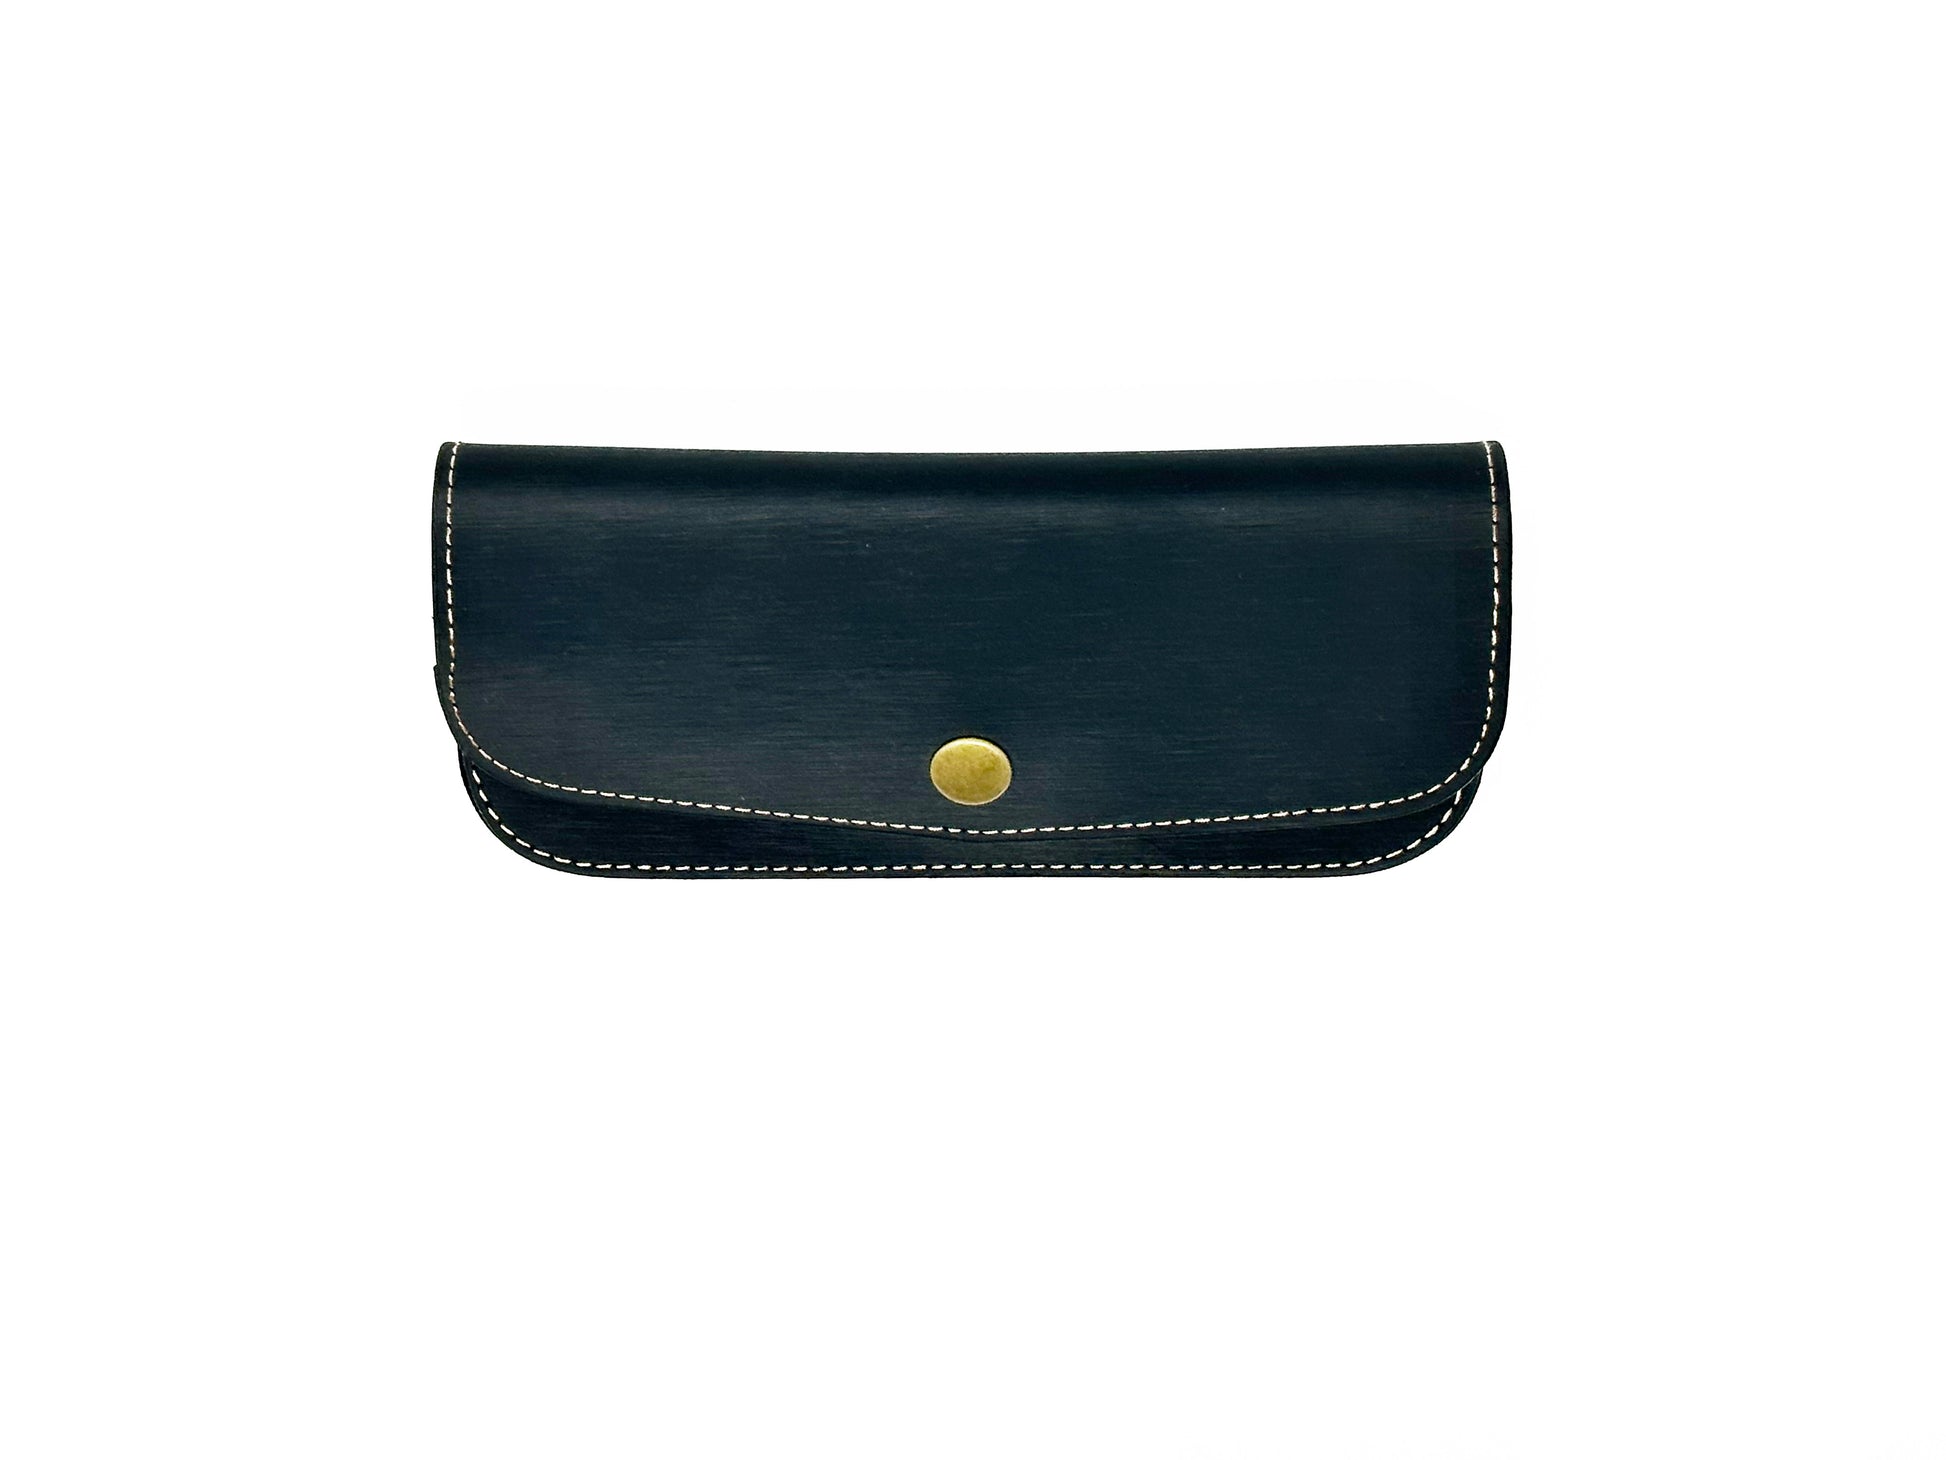 Black leather snap case with gold button and white stitching